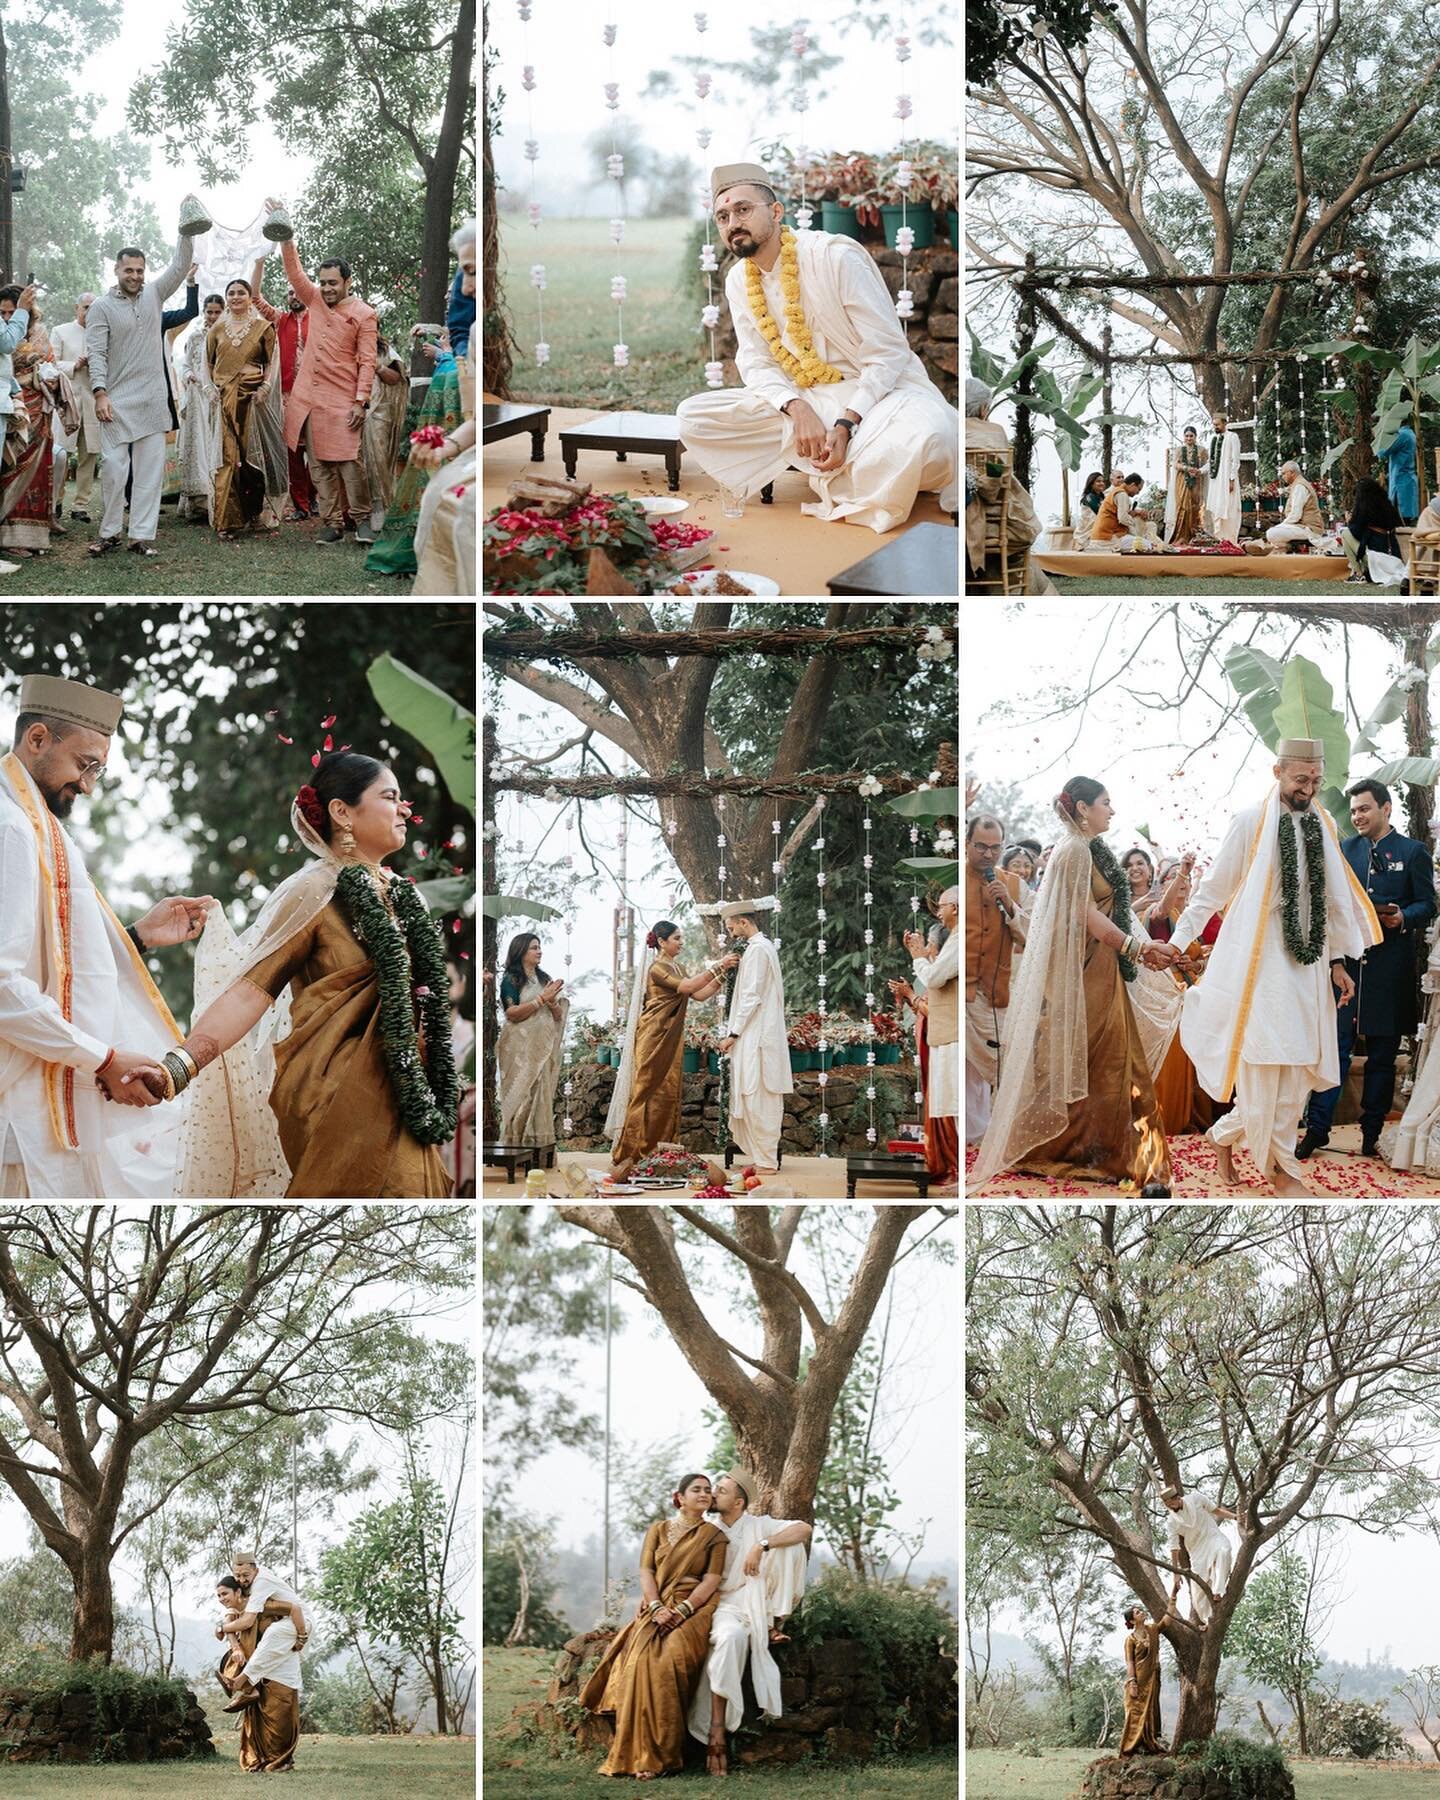 Tanisha and Aakash decided to celebrate their love surrounded by nature and those closest to them. What a beautiful morning it was.

Photographed by @_rachanakaar_ &amp; @gauravhingne for @gaatha.co.in 
Edited by @vedant.fe 
Decor- @panachedecorsoffi